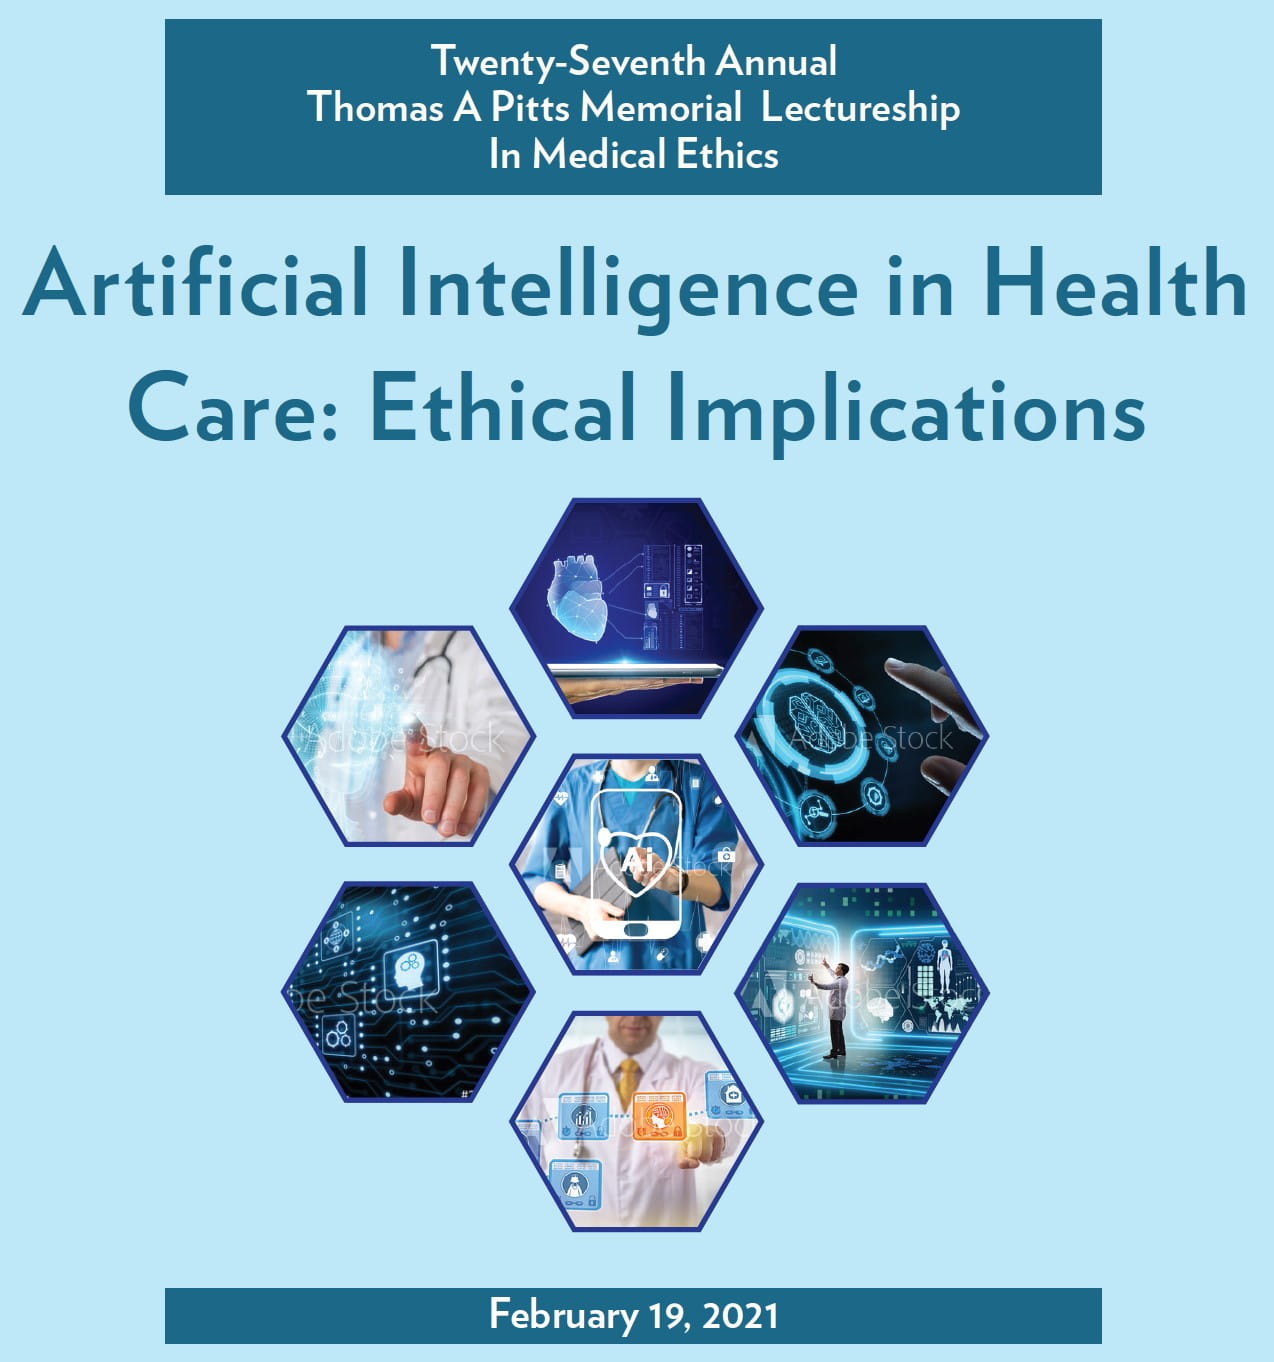 Twenty-Seventh Annual Thomas A. Pitts Memorial Lectureship in Medical Ethics Artificial Intelligence in Health Care: Ethical Implications February 19, 2021